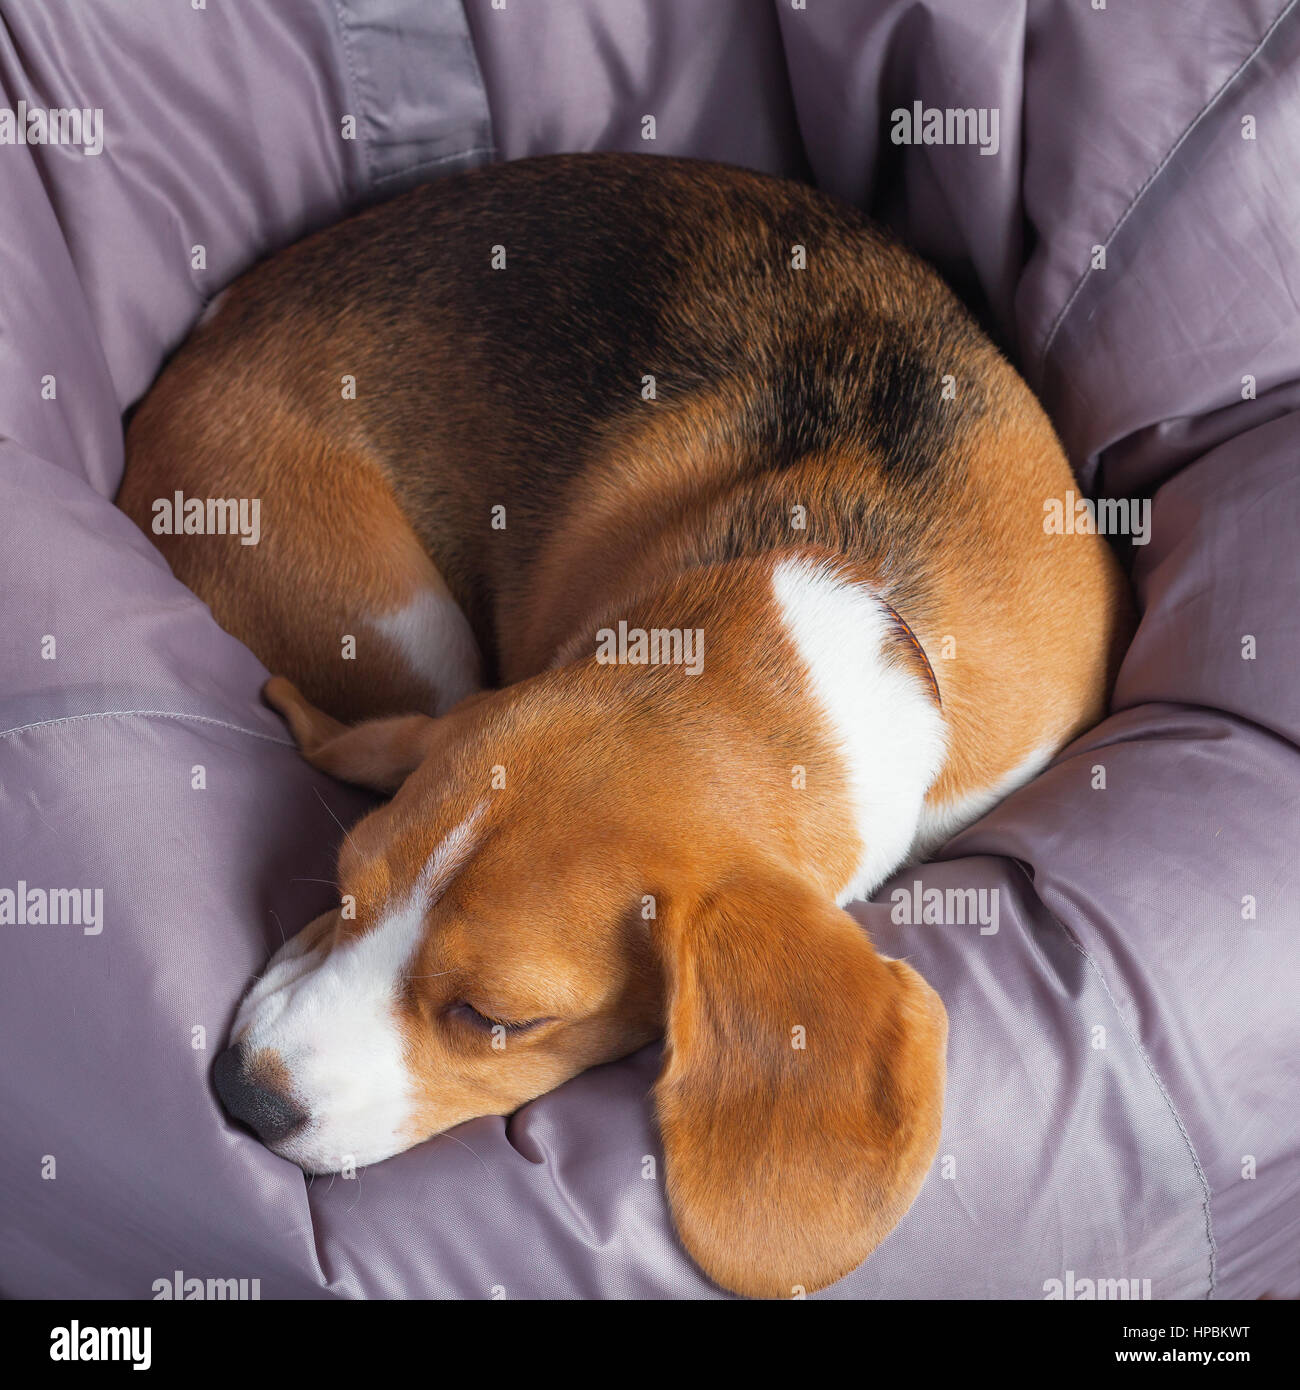 Beagle sleeping on a soft light blue chair at home Stock Photo